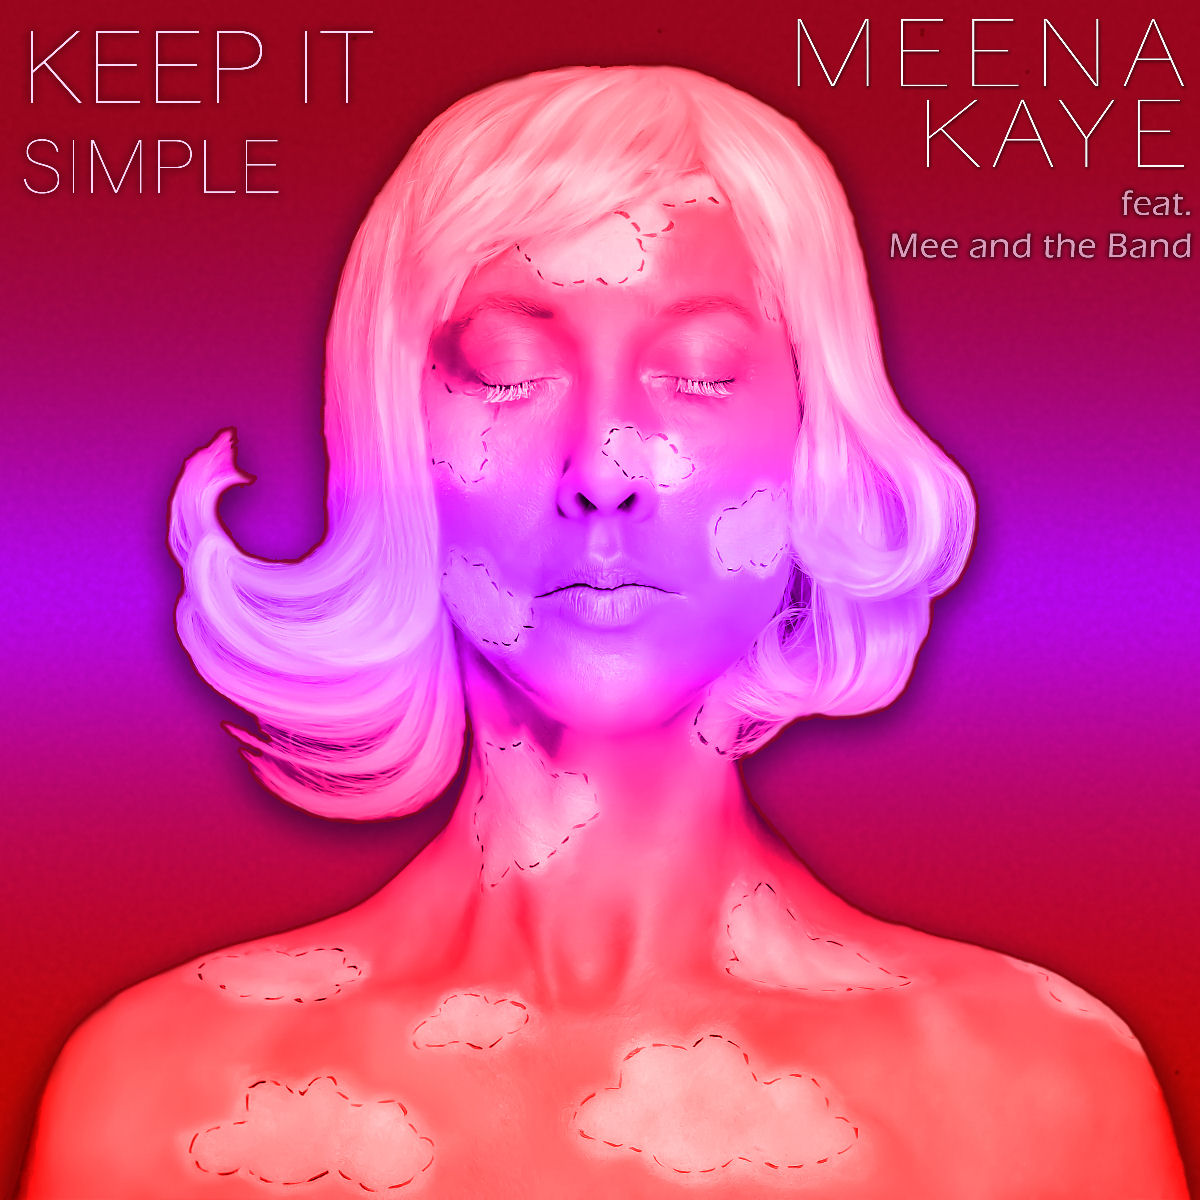  Meena Kaye – “Keep It Simple” Featuring Mee And The Band